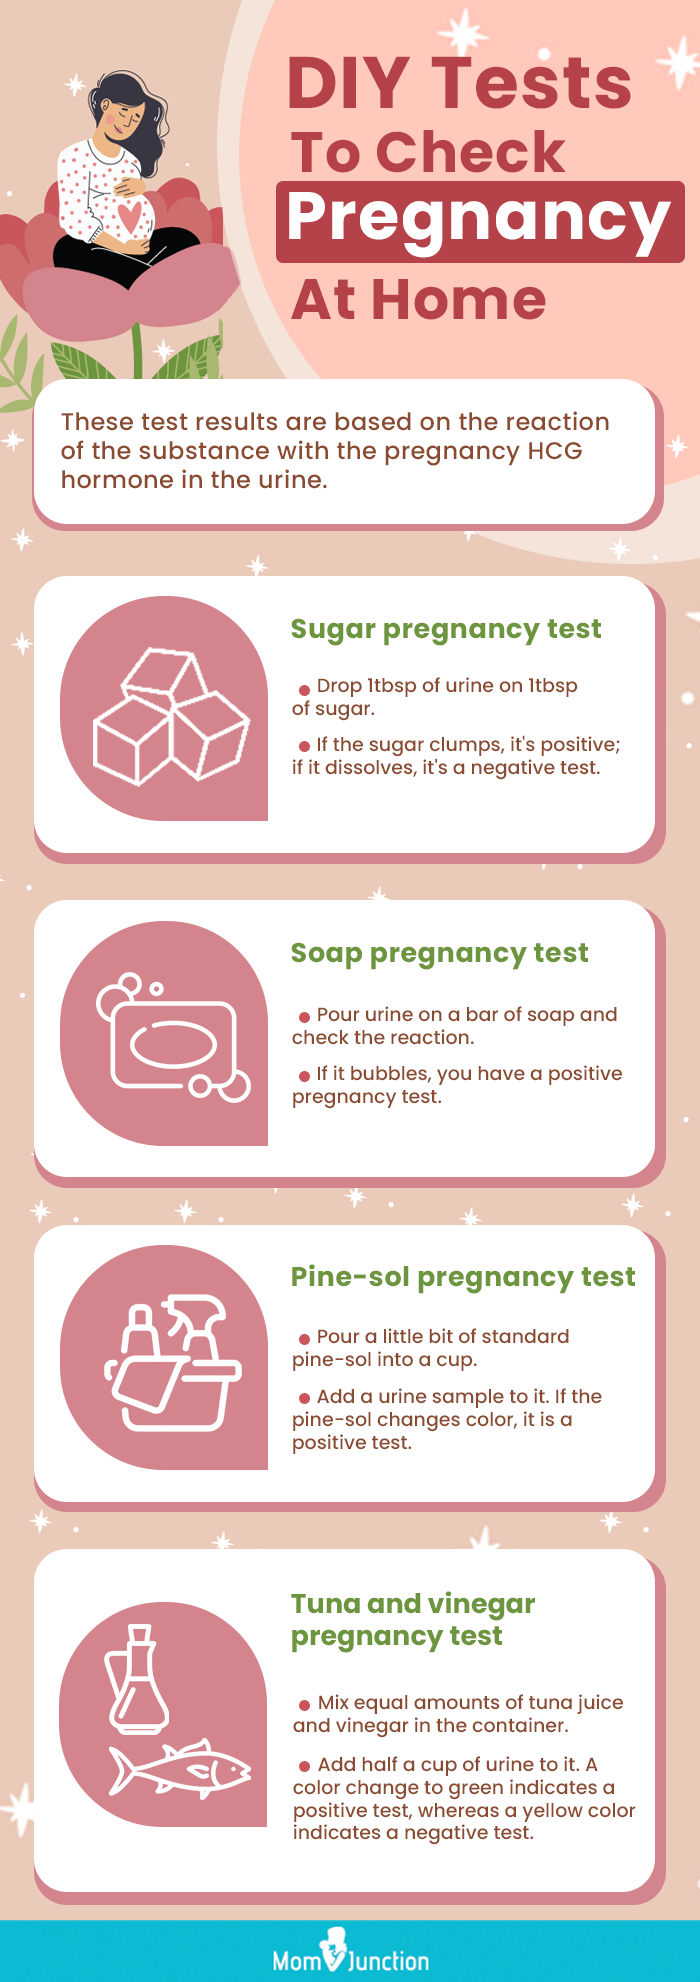 13 Simple Homemade (DIY) Pregnancy Tests: Do They Work?